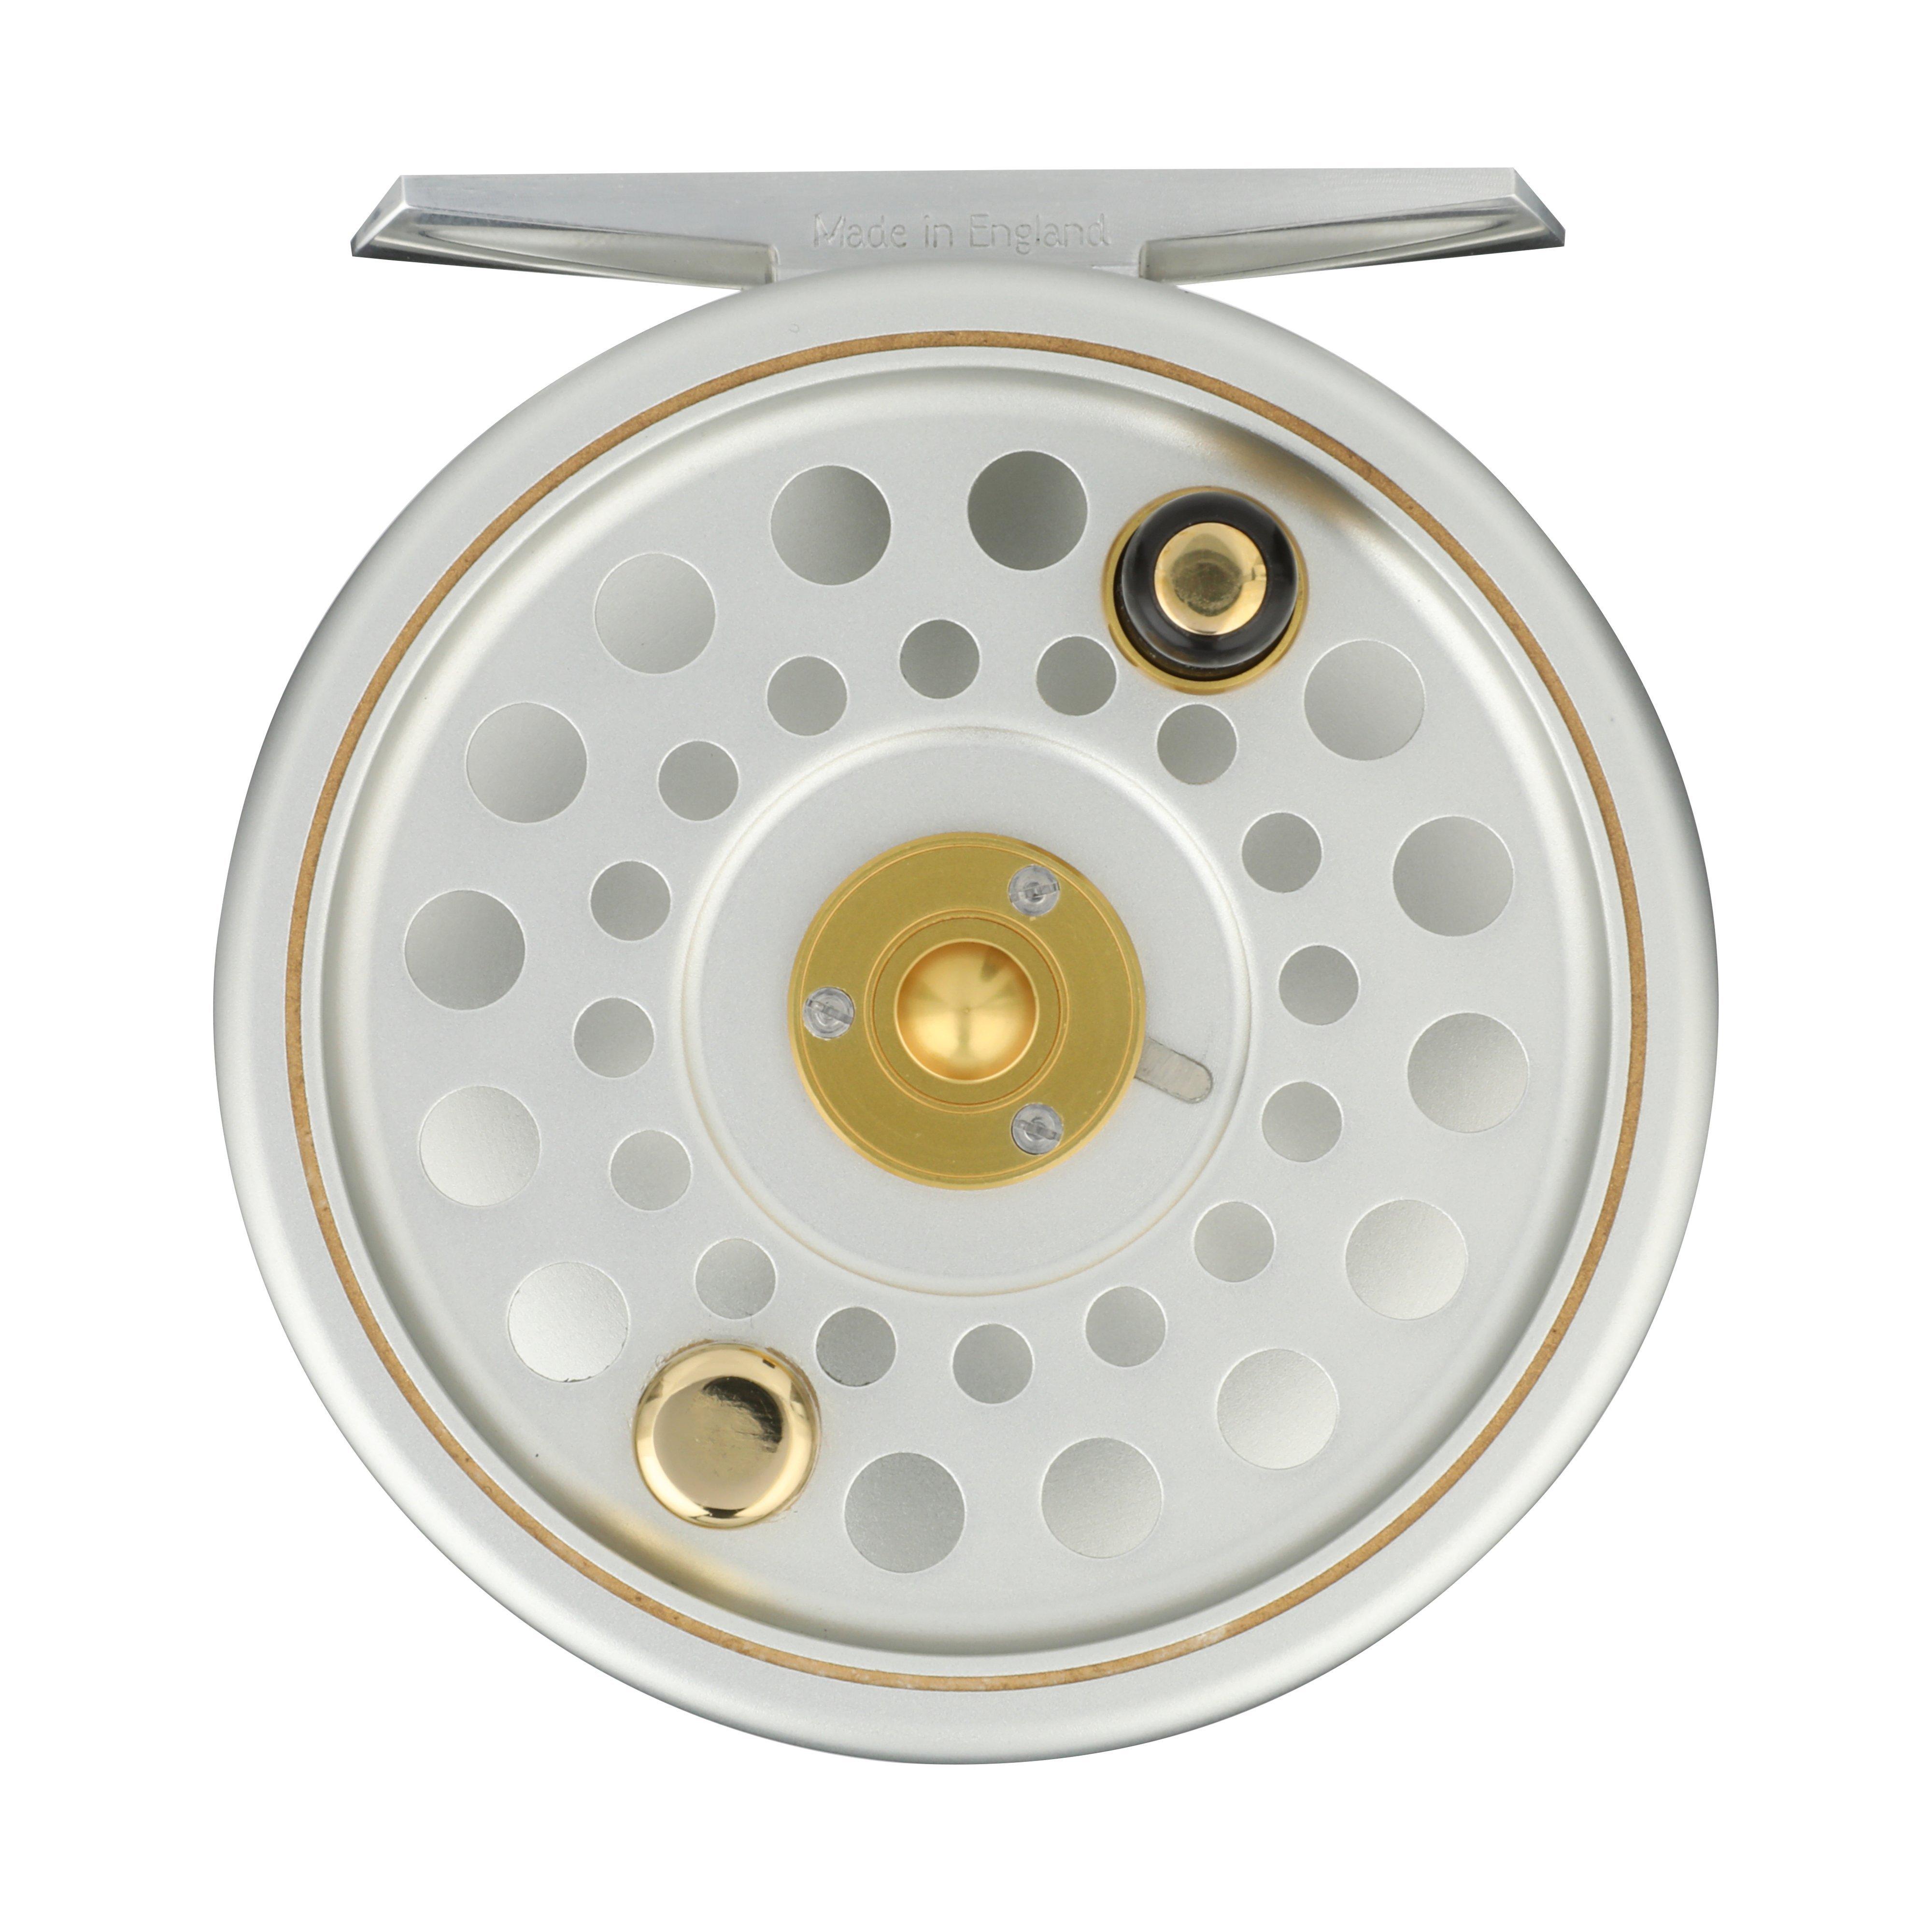 Hardy Sovereign Fly Reel - Hardy Fishing US